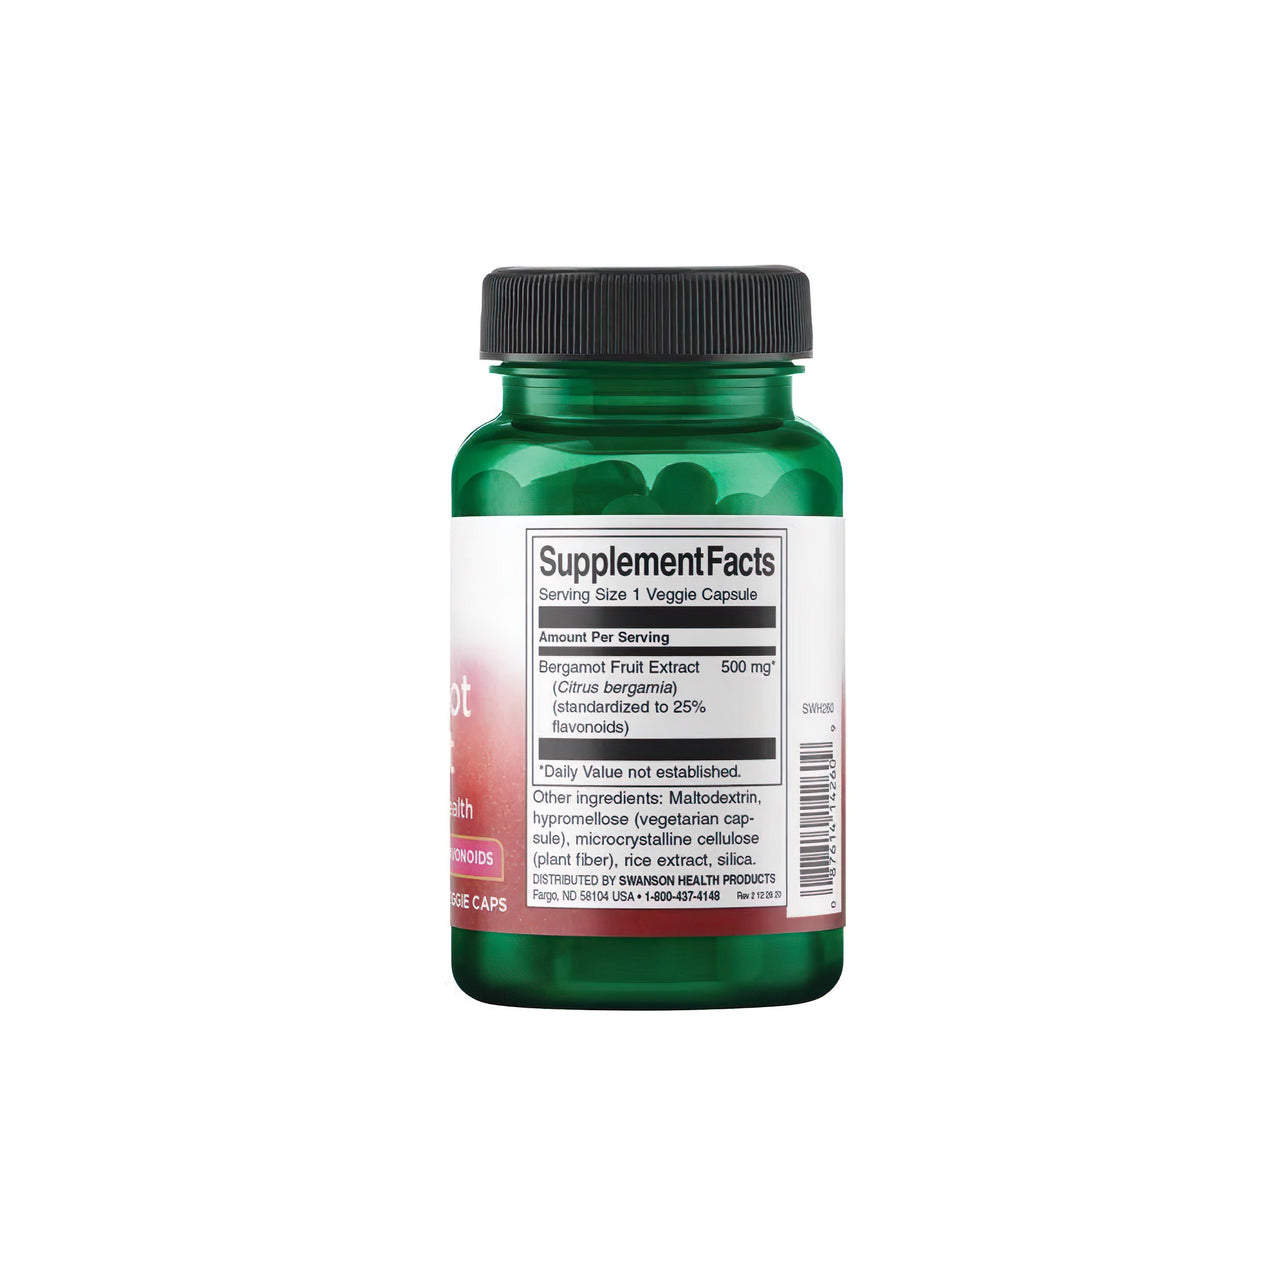 A dietary supplement bottle of Swanson Bergamot Extract 500 mg 30 vcaps on a white background.